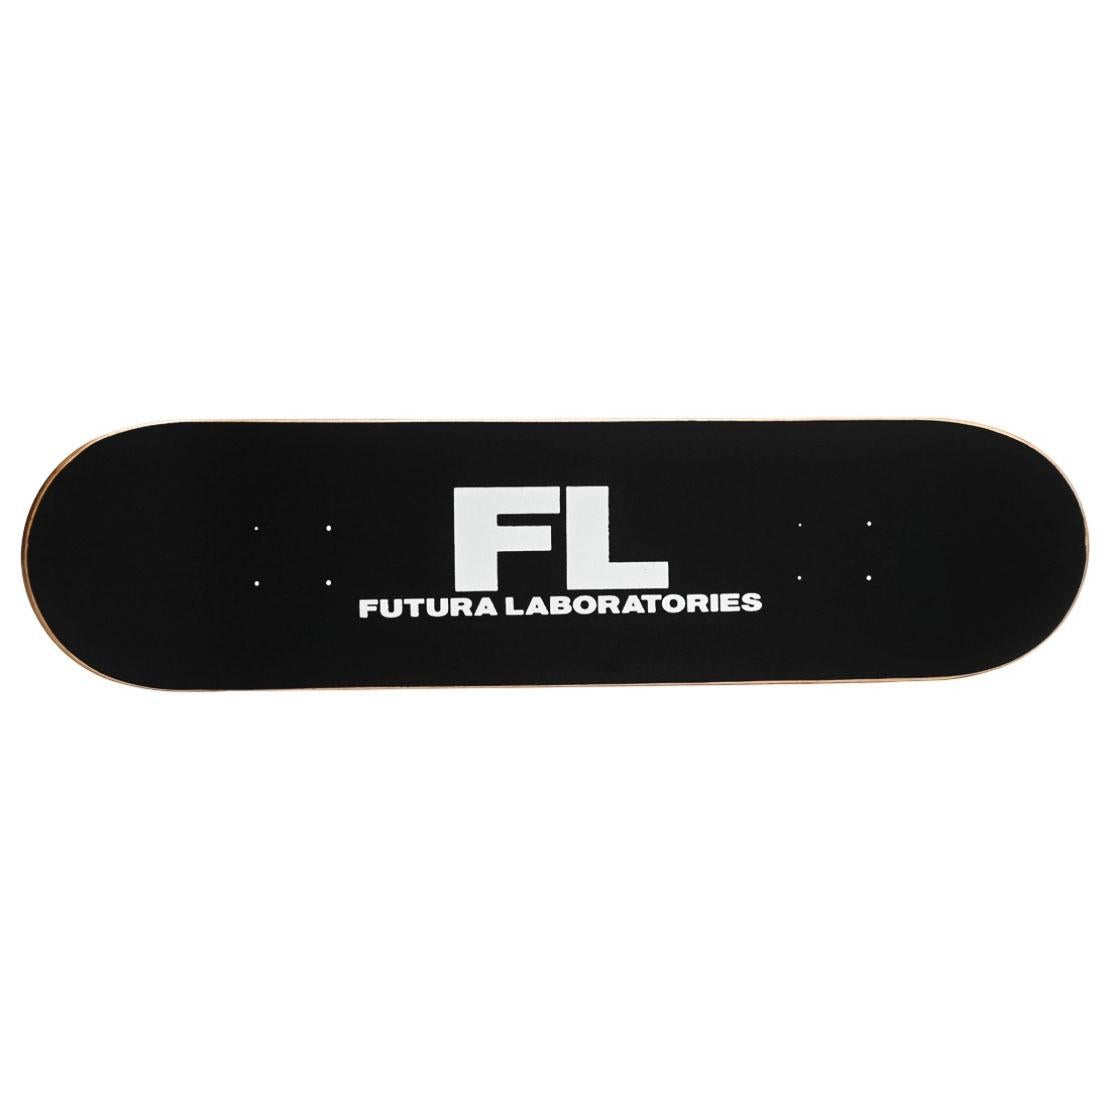 Futura Skateboard Deck:

Medium: Silkscreen on Maplewood Skateboard Deck. Year: 2021. 
Dimensions: 31 x 8 inches (38.1 x 22.9 cm).
In original shrink wrap & box; excellent condition.
Printed signature from an edition of unknown.
Published by Futura